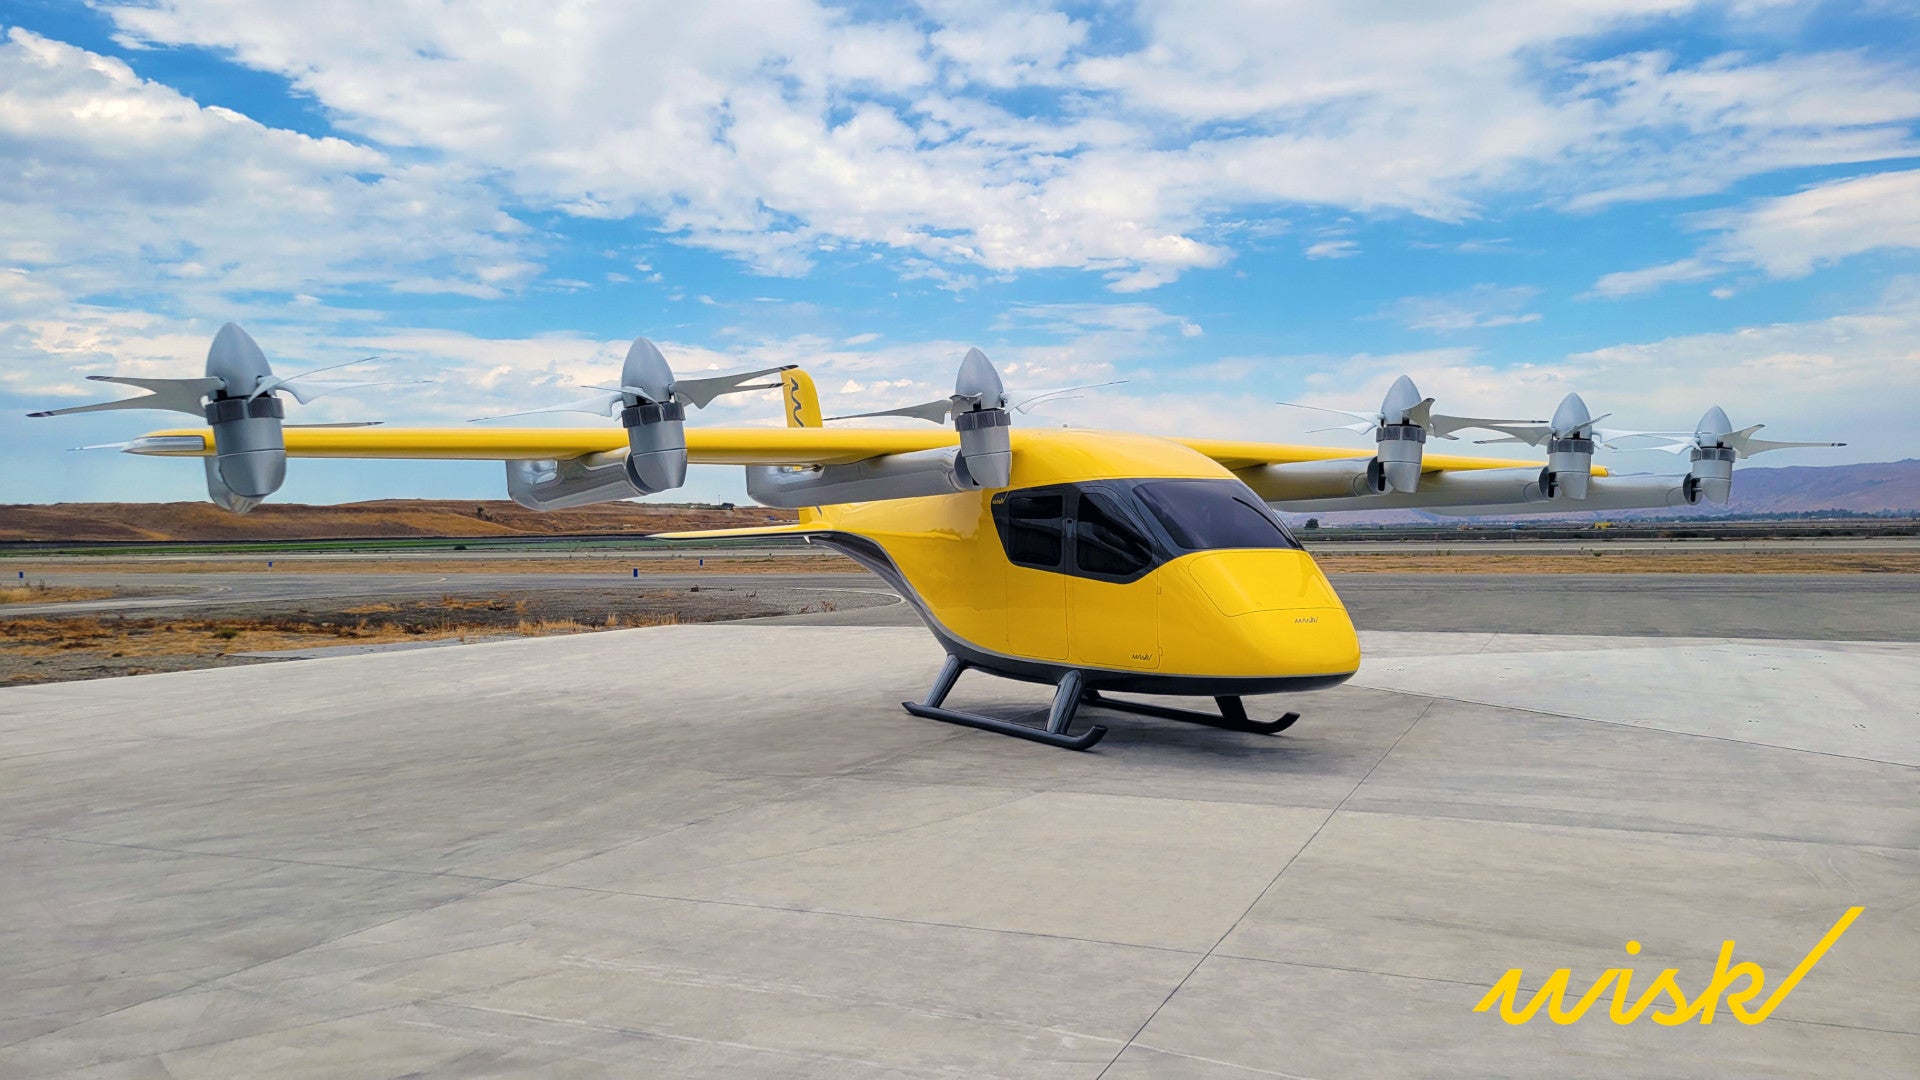 Wisk Aero Completes Groundbreaking Air Taxi Demonstration at Oshkosh